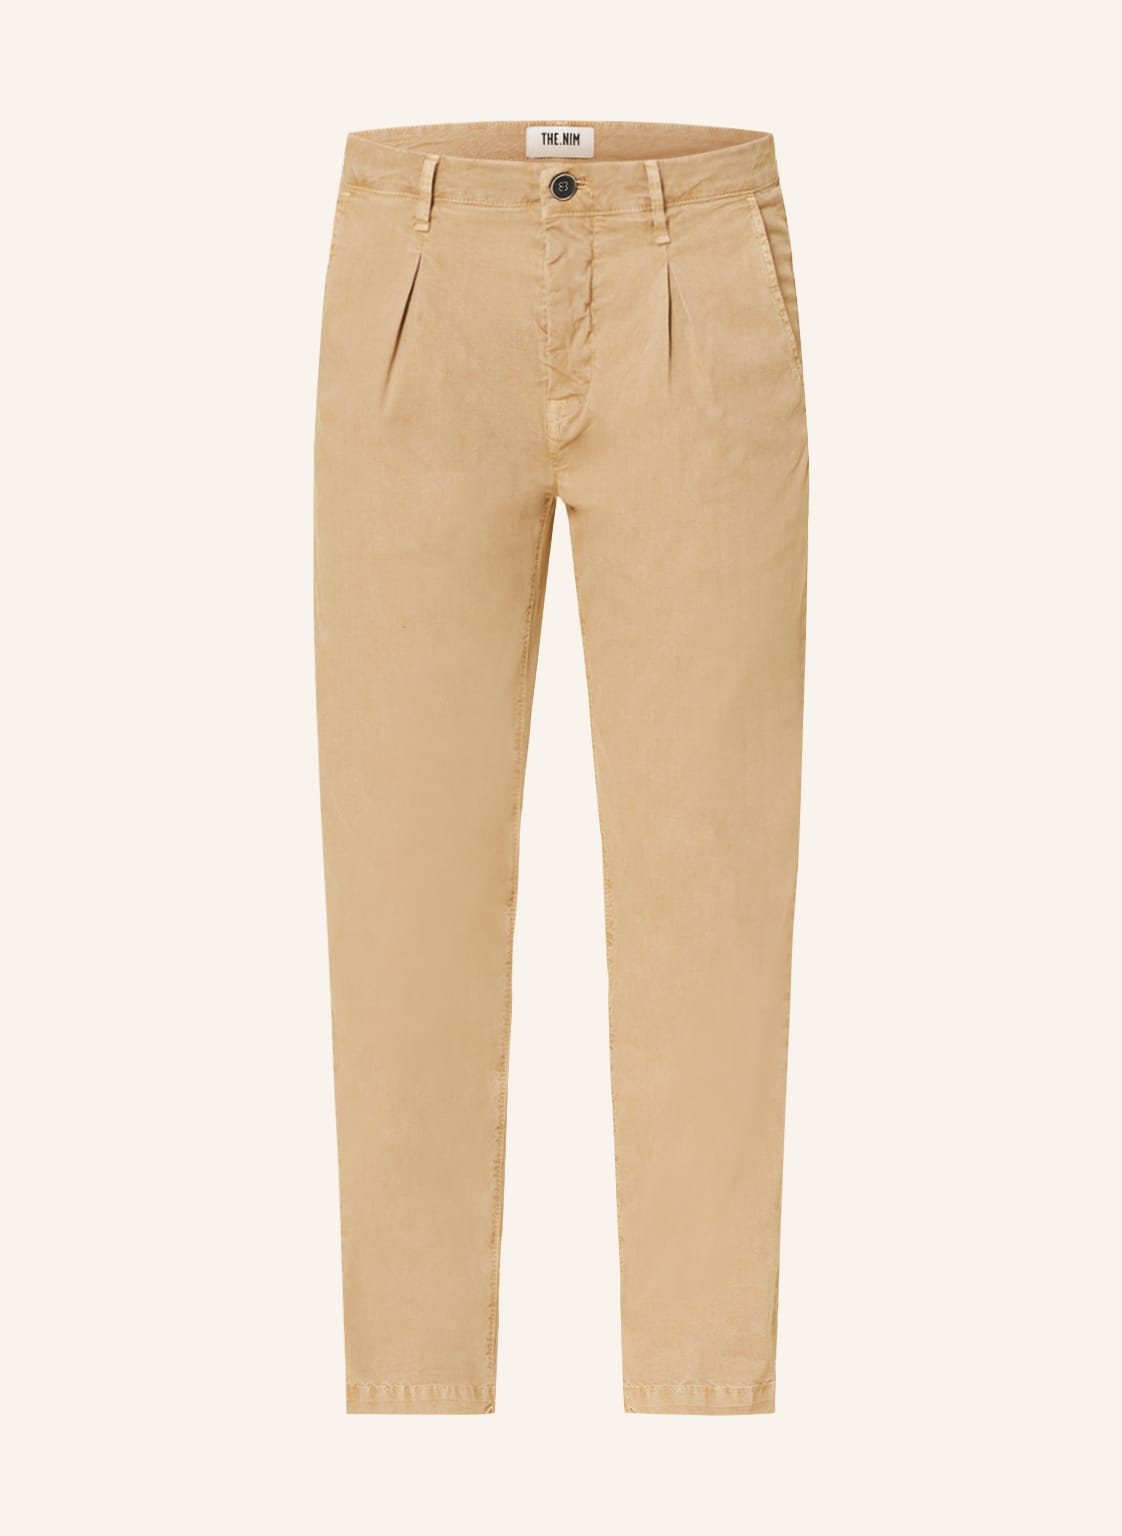 Image of The.Nim Standard Chino Extra Slim Fit beige